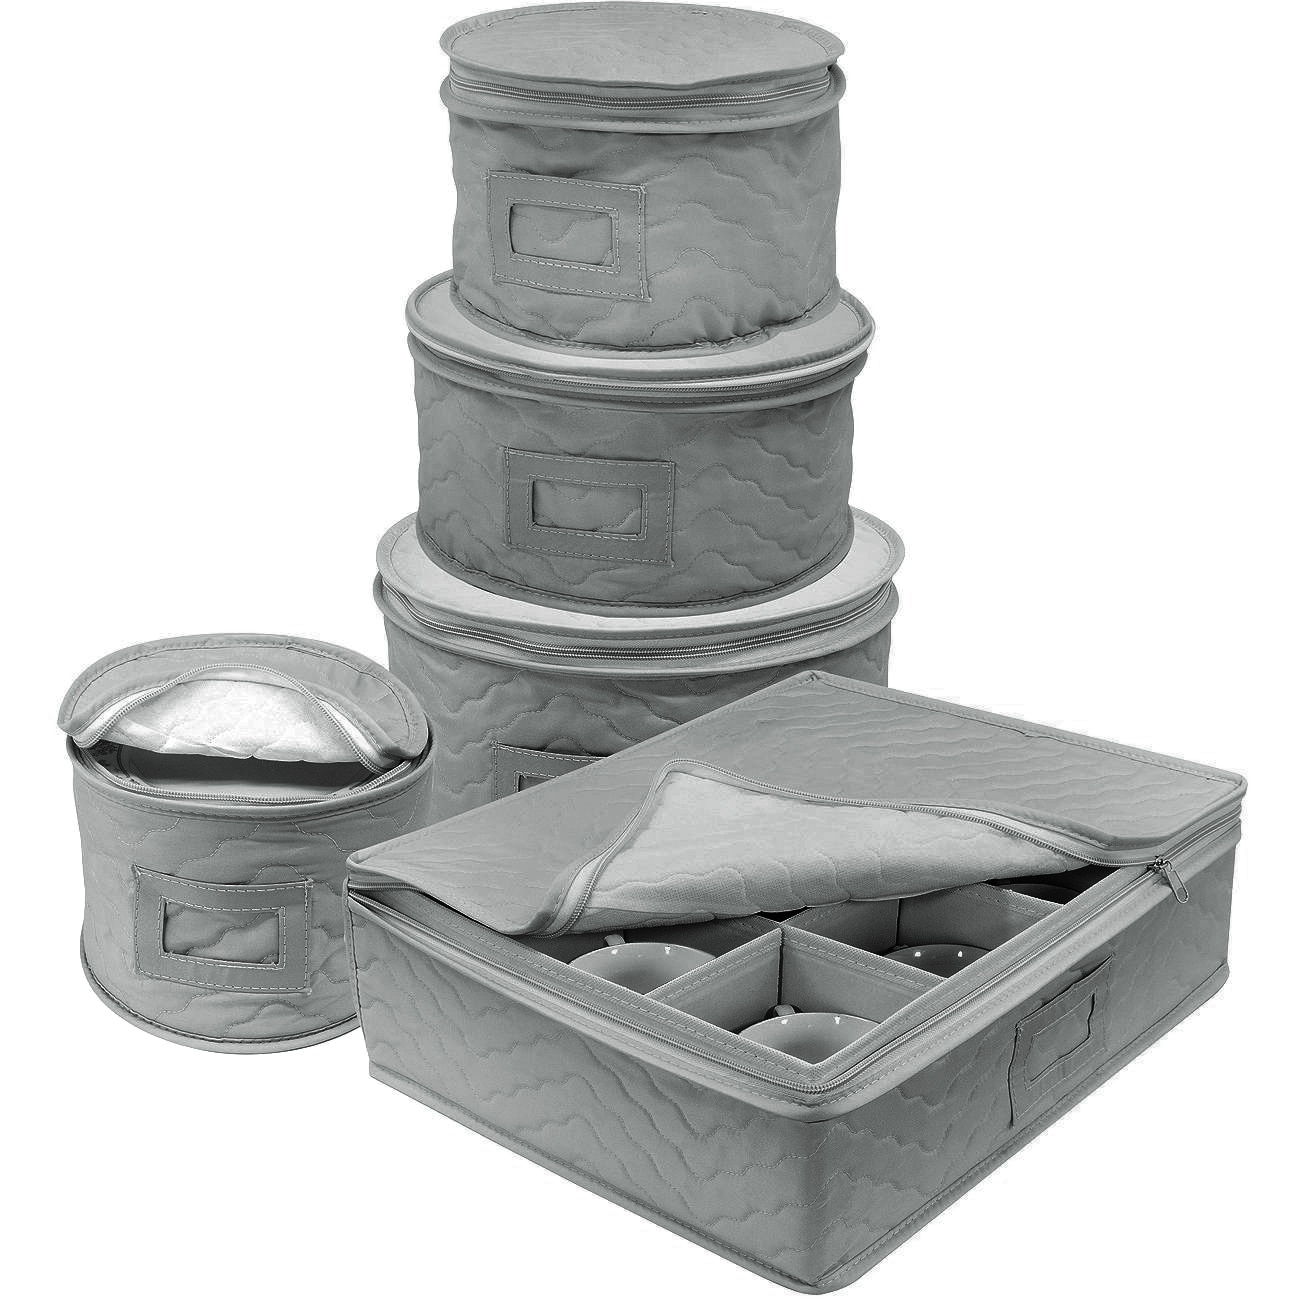 https://ak1.ostkcdn.com/images/products/is/images/direct/2827d7ad51a0946150f59aff3789937593f46172/5-Piece-Dish-Storage-Set-Gray.jpg